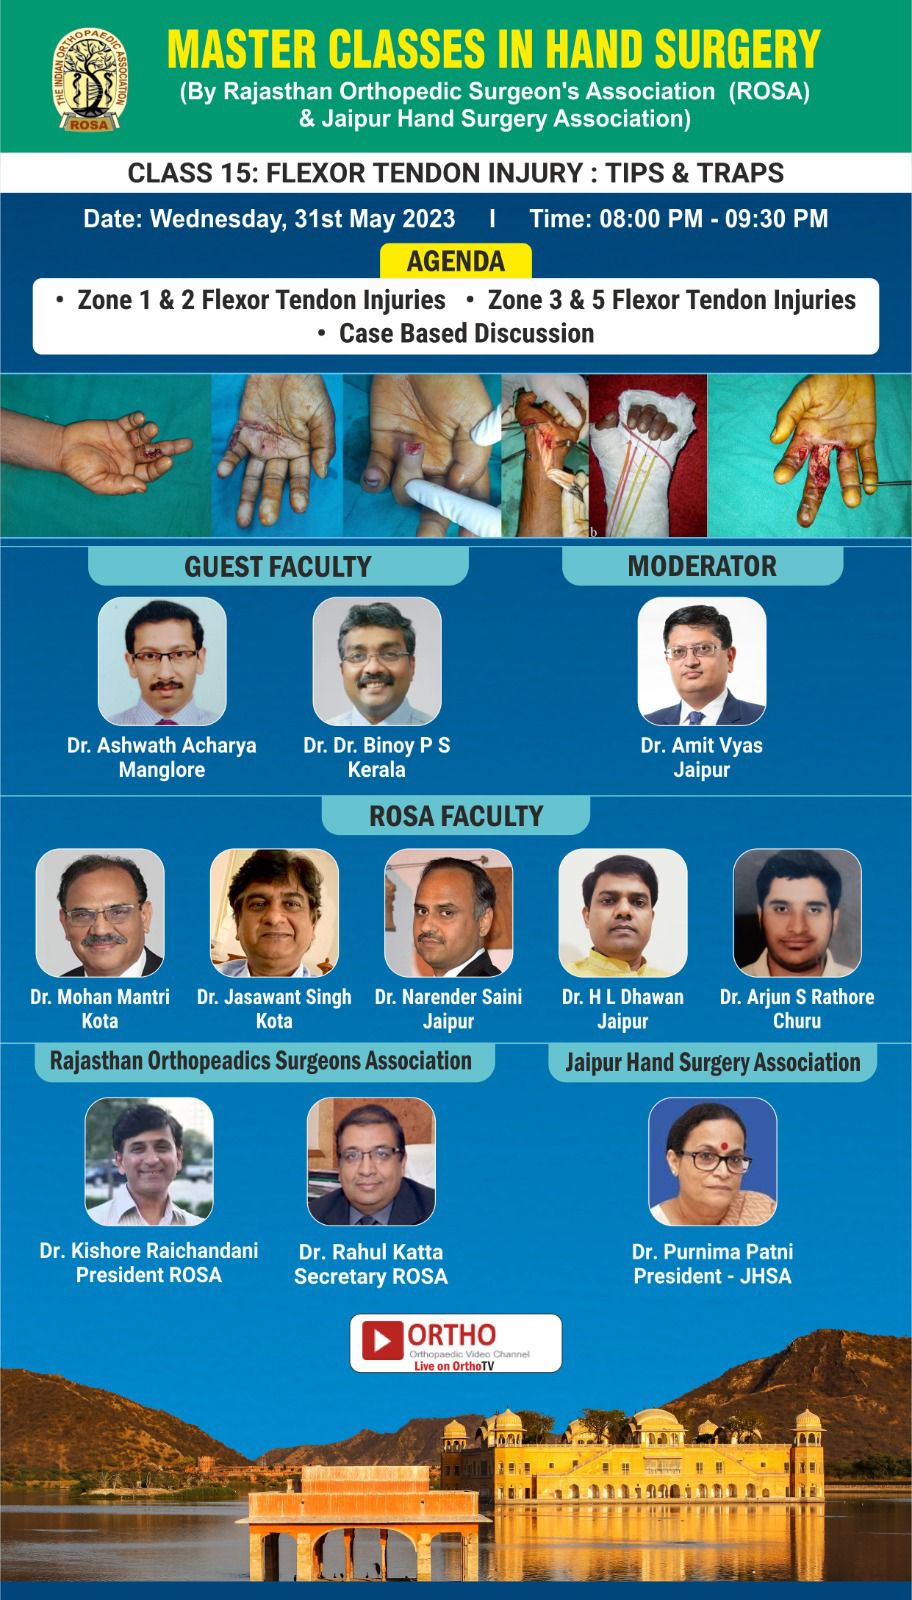 MASTER CLASSES IN HAND SURGERY - FLEXOR TENDON INJURY: TIPS & TRAPS - By Rajasthan Orthopedic Surgeon's Association (ROSA) & Jaipur Hand Surgery Association